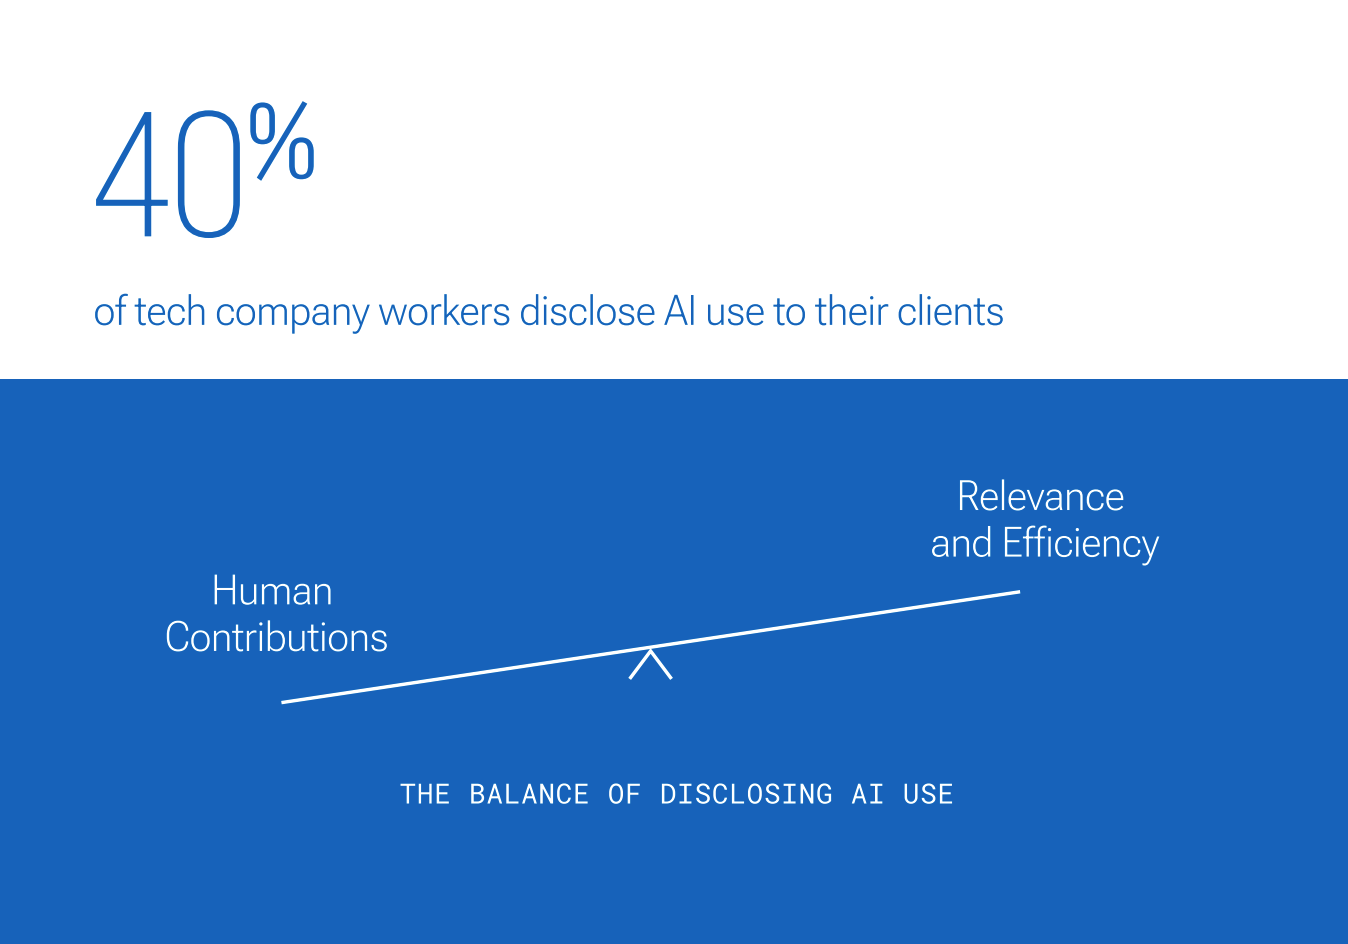 40% of tech workers disclose AI use to their clients